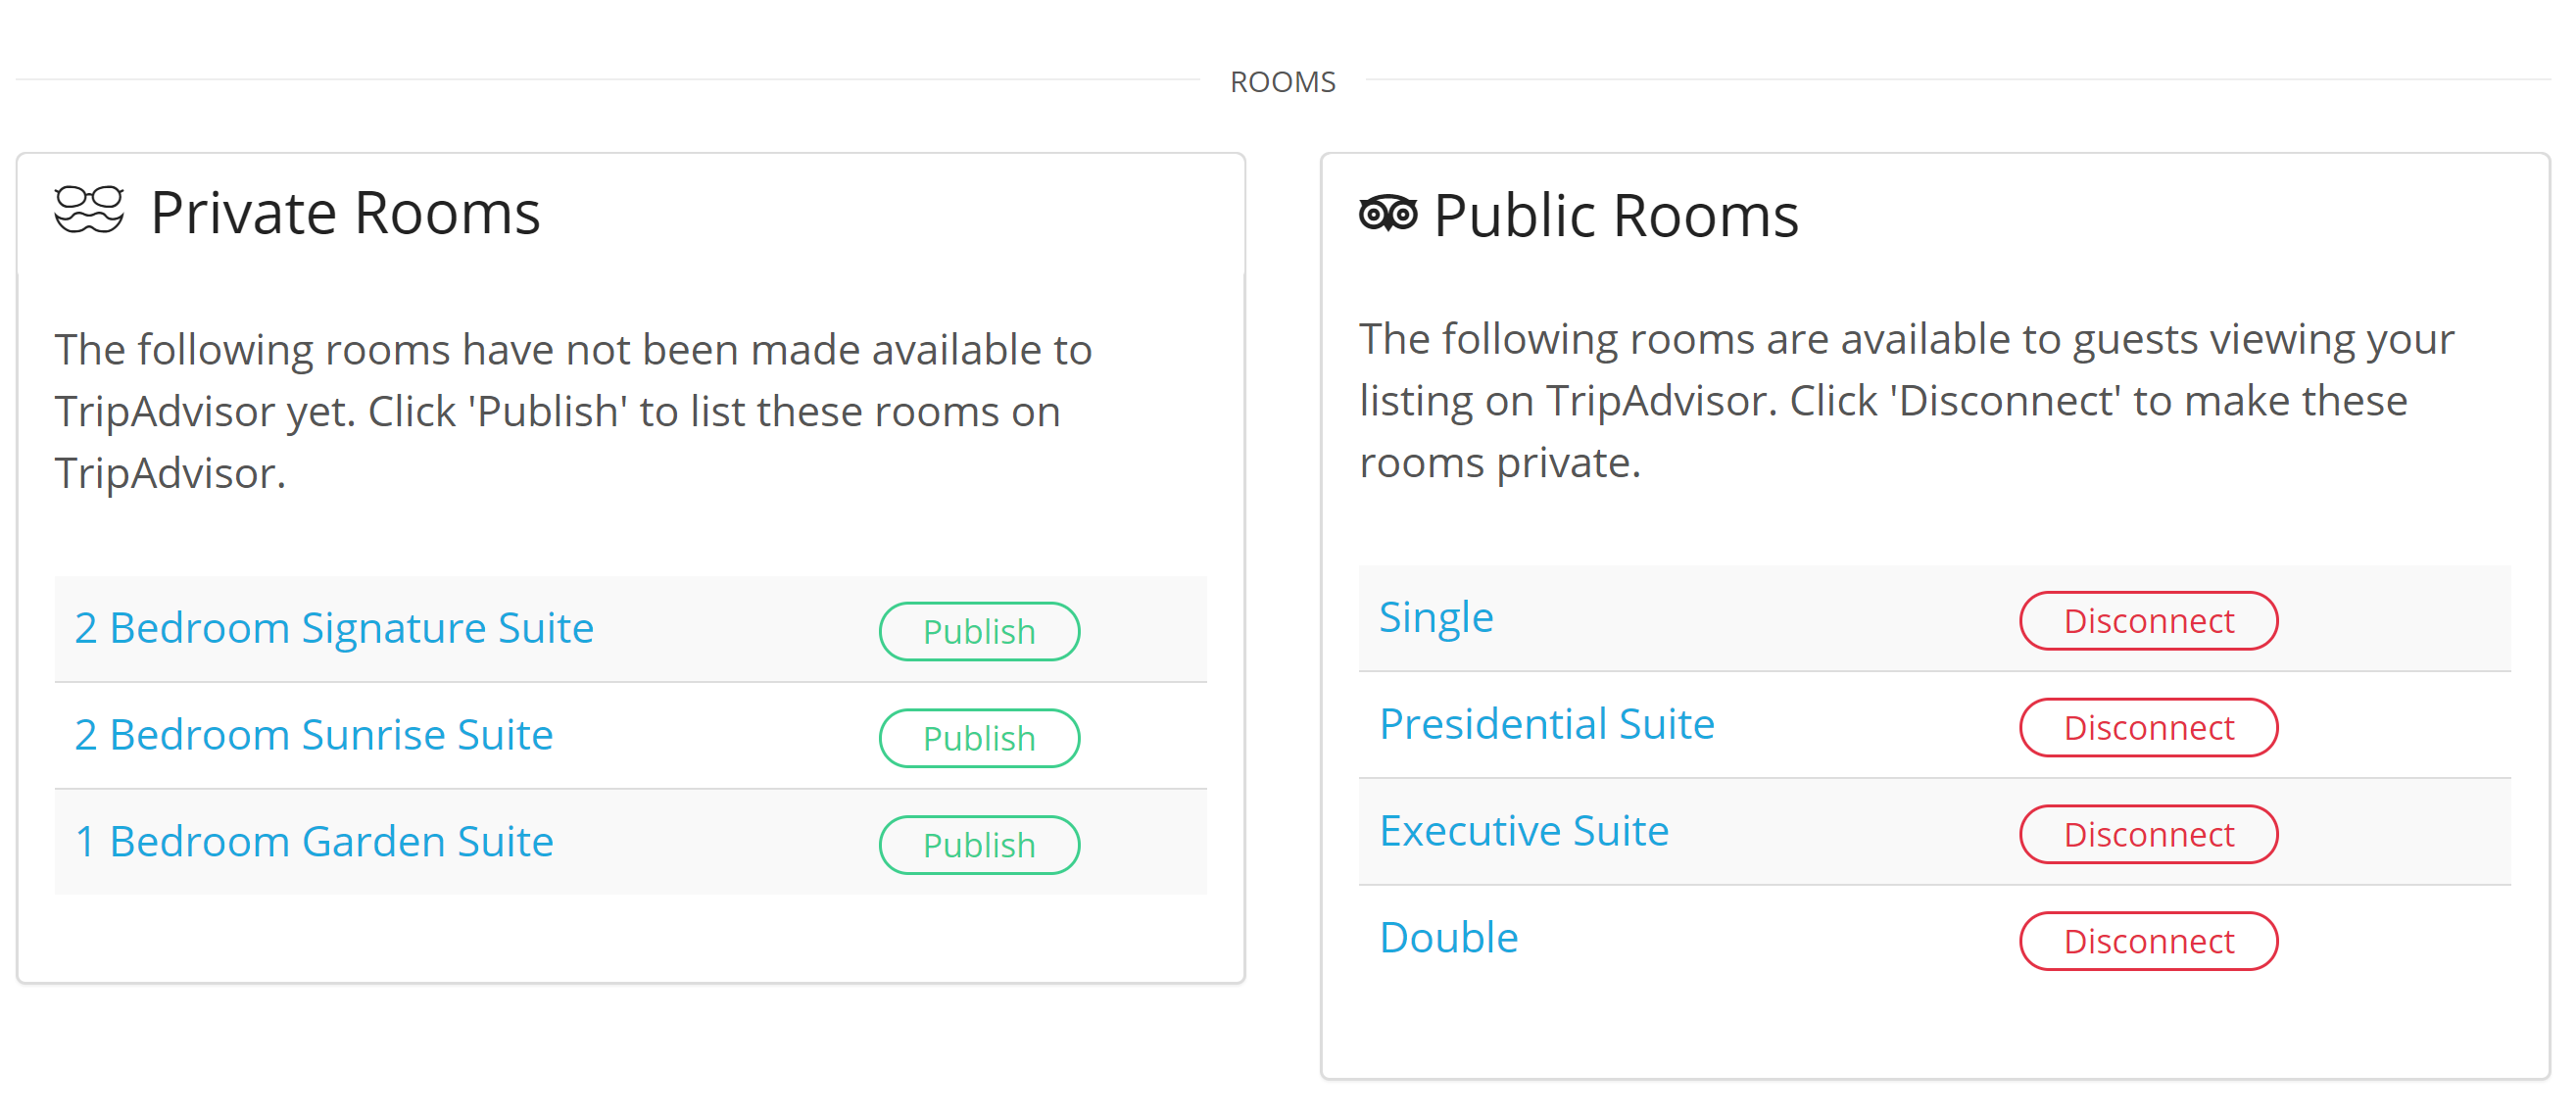 Hotel TripAdvisor TripConnect 
            We are proud to be a TripAdvisor TripConnect Premium Partner. We provide a simple API level connection that allows our hotel partners to manage their rooms, rates, and meta content automatically on this network.